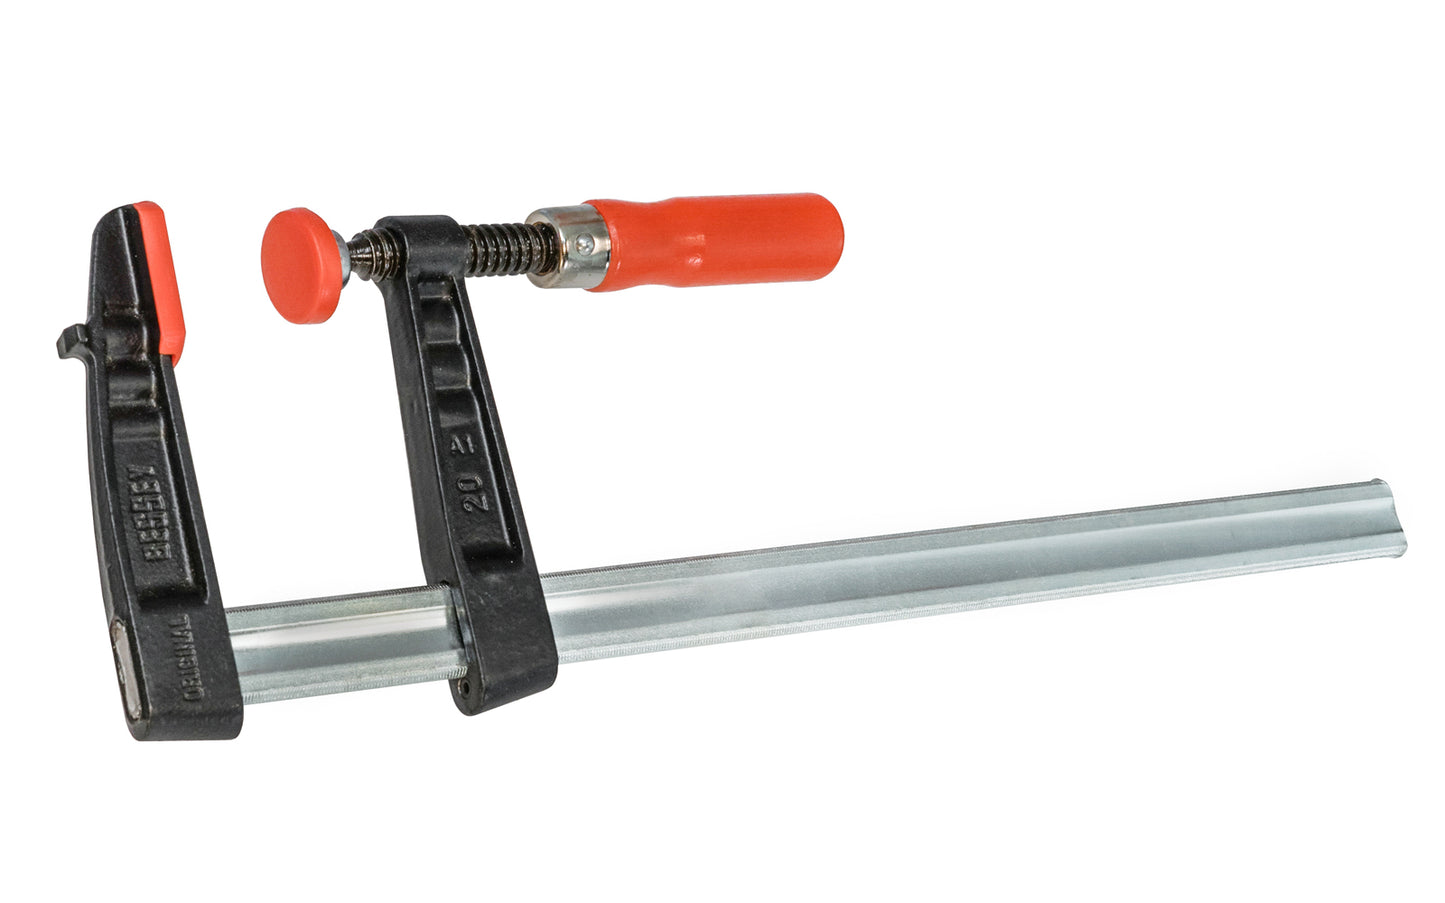 Bessey Light-Duty Steel Bar Clamps heads are made of malleable cast iron. The fixed jaw & sliding arm generates powerful & rigid clamping - acts against torsional forces - Wooden handles - 880 lbs. clamping pressure - Model No. TG4.016 - "TG series" Bessey Clamps 16" max opening - 4" throat depth - Made in Germany - 091162007525